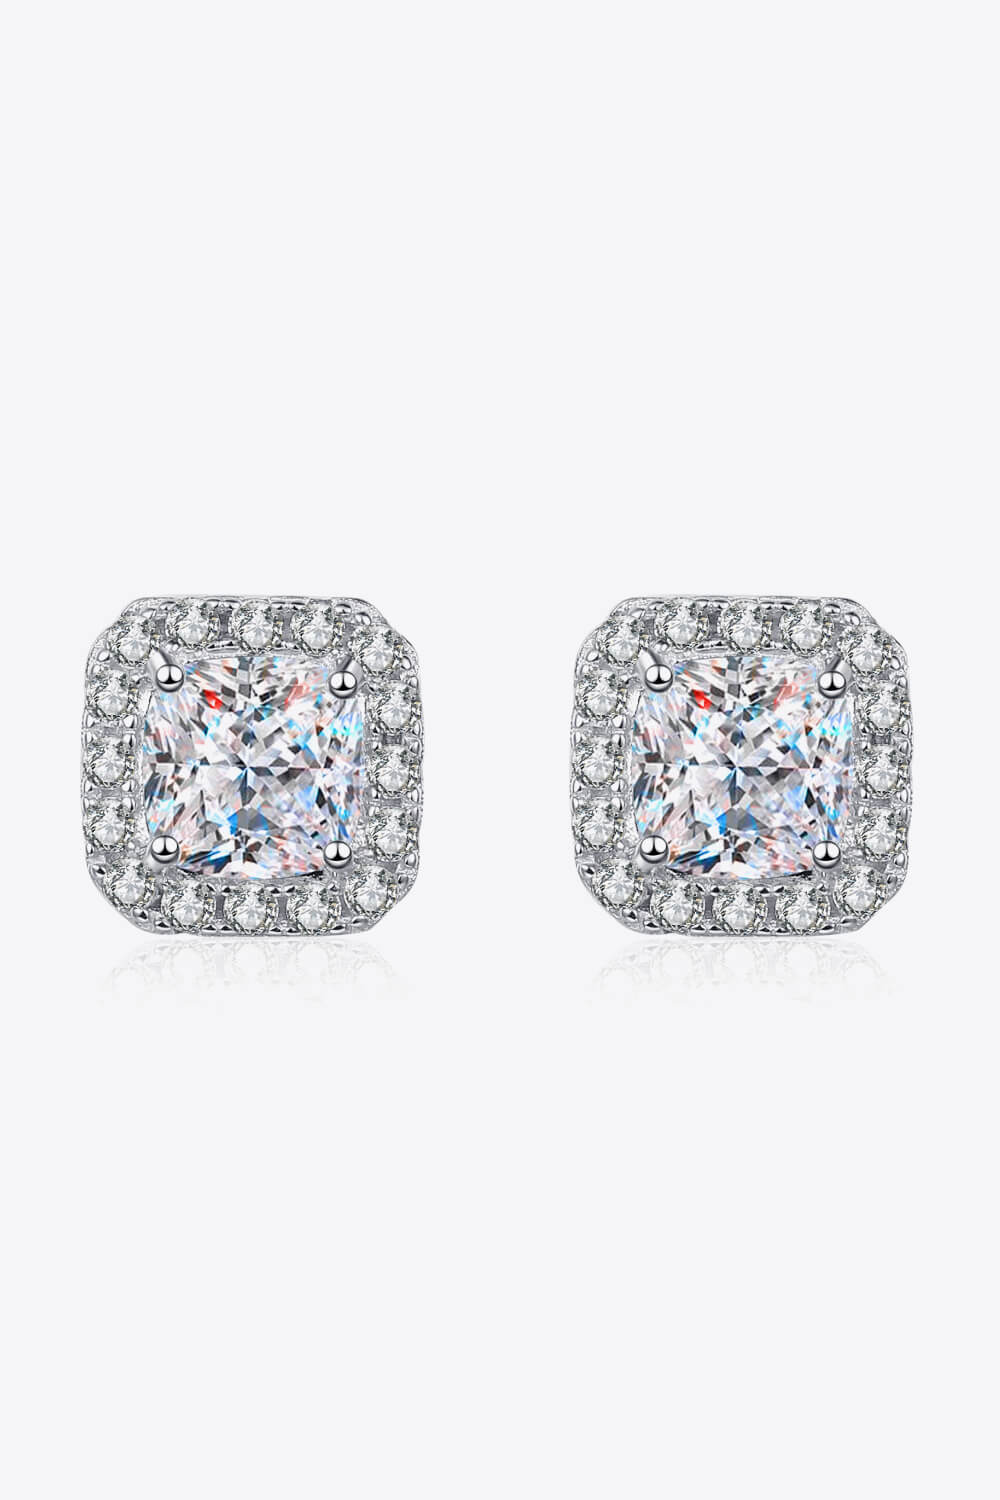 925 Sterling Silver Inlaid 2 Carat Moissanite Square Stud Earrings BLUE ZONE PLANET